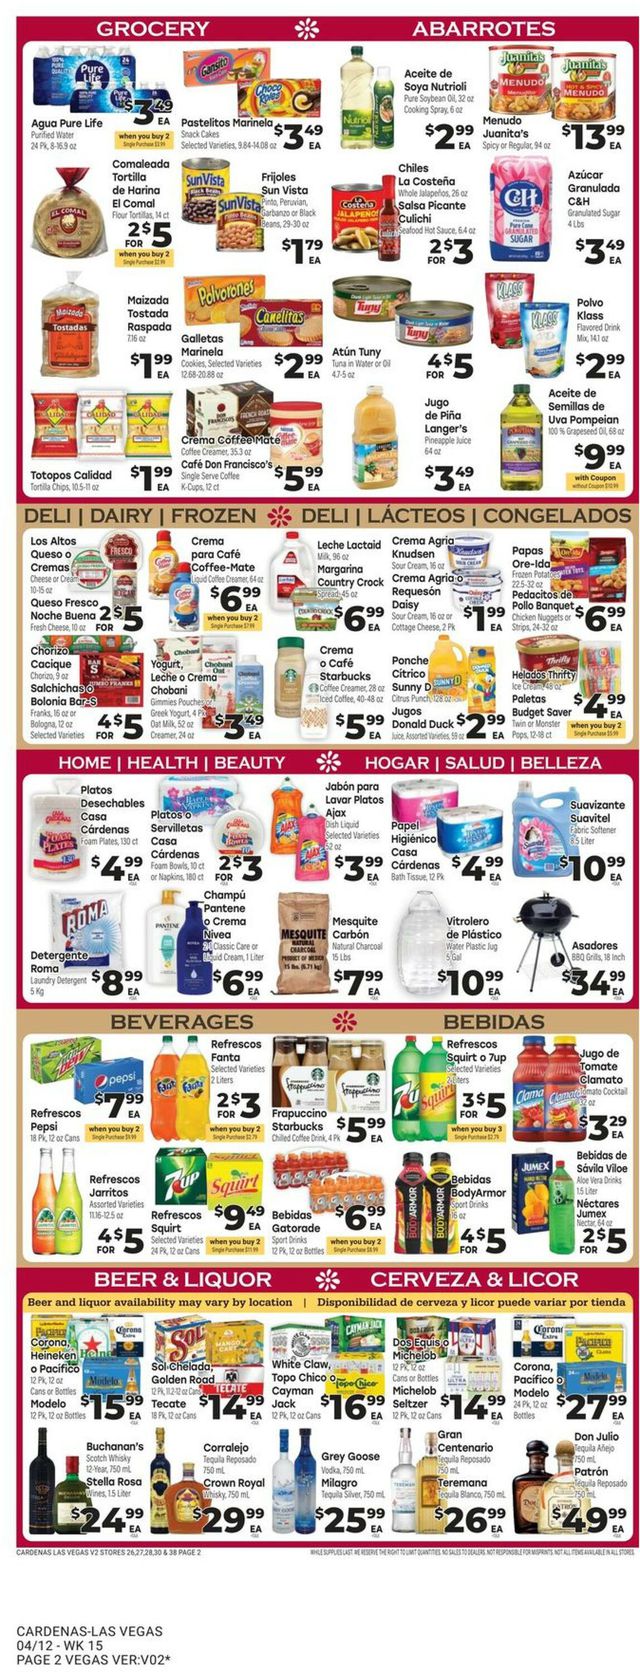 Cardenas Ad from 04/12/2023